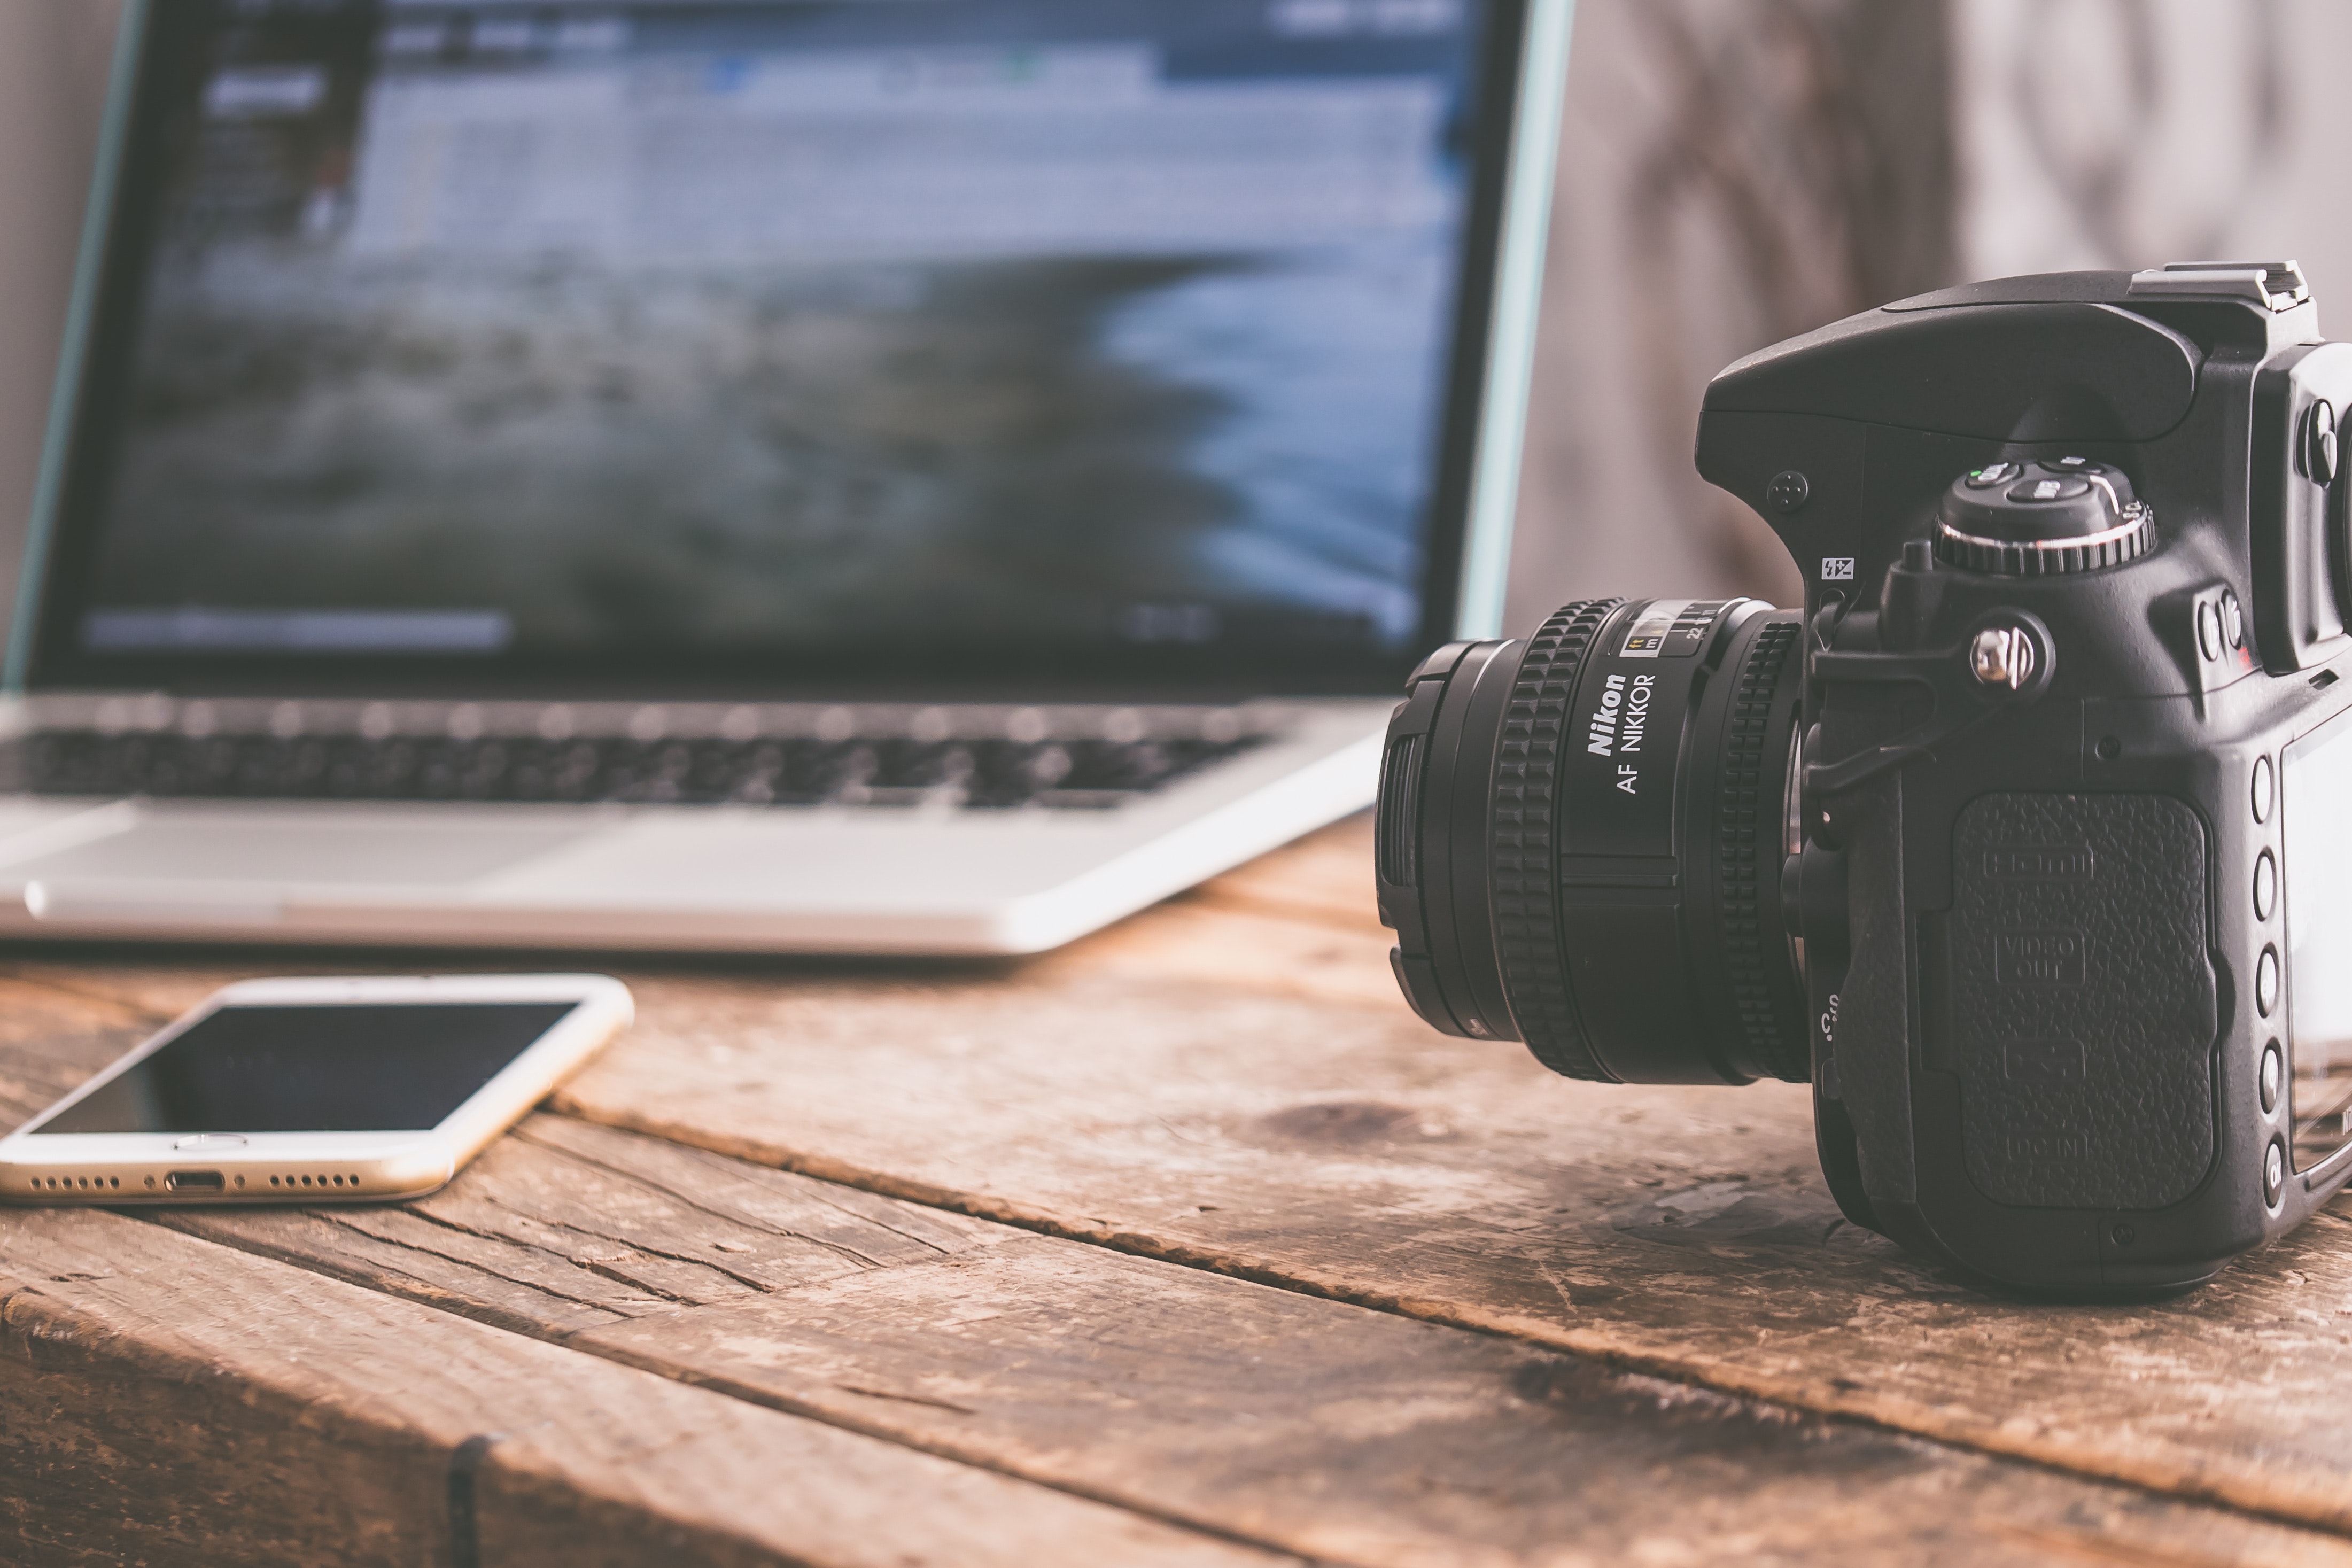 Five Tips for Producing Video Content During Social Distancing